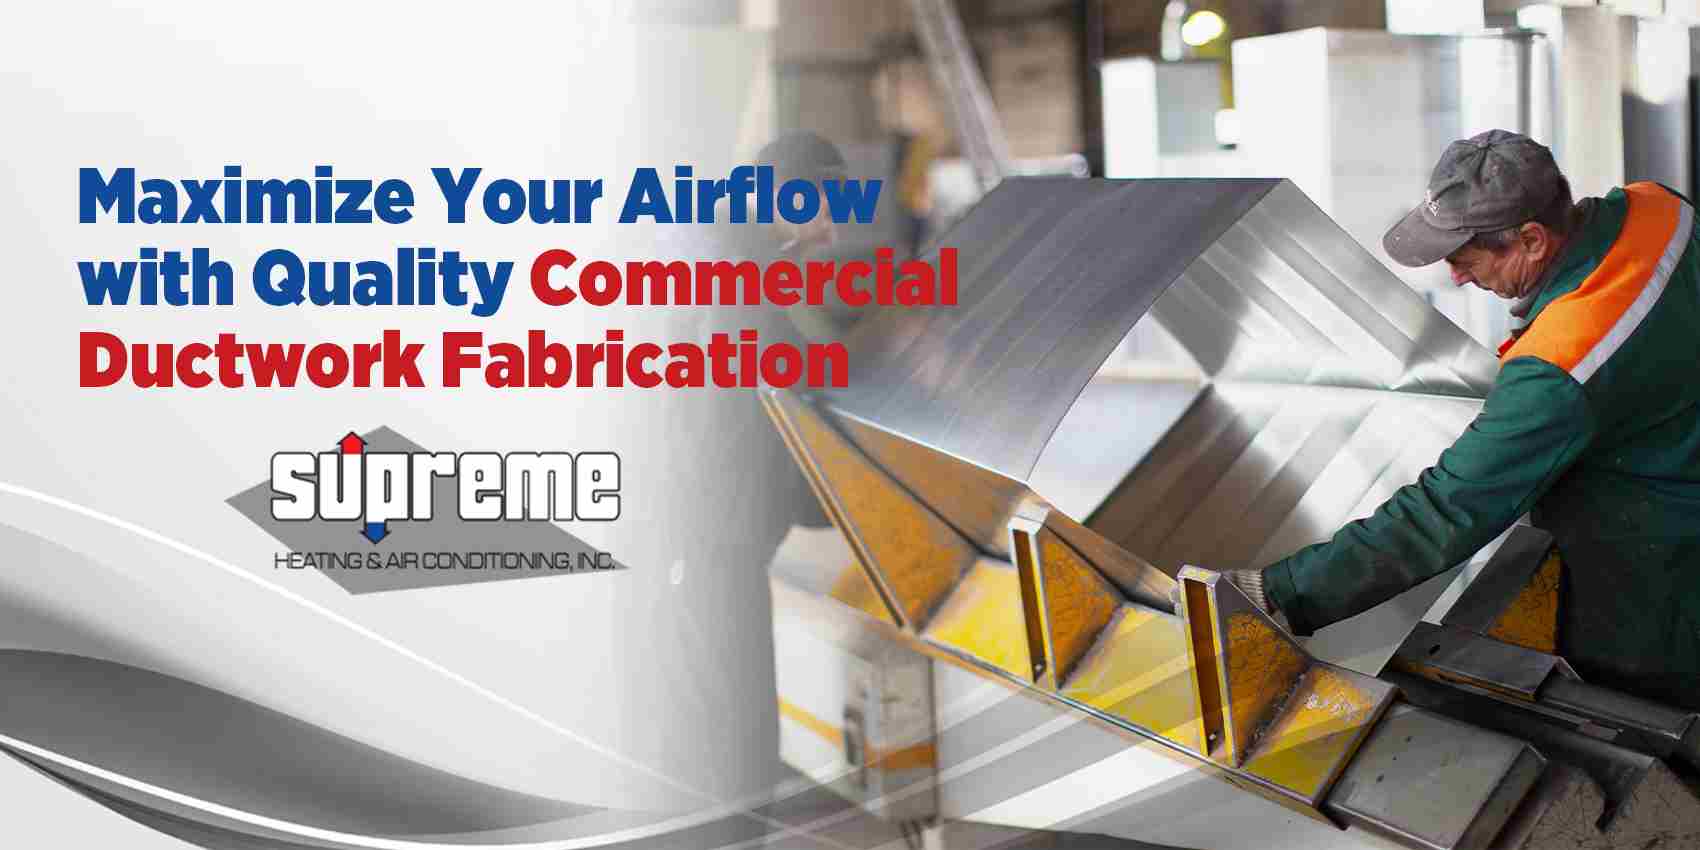 SUPREME_Maximize-Your-Airflow-with-Quality-Commercial-Ductwork-Fabrication